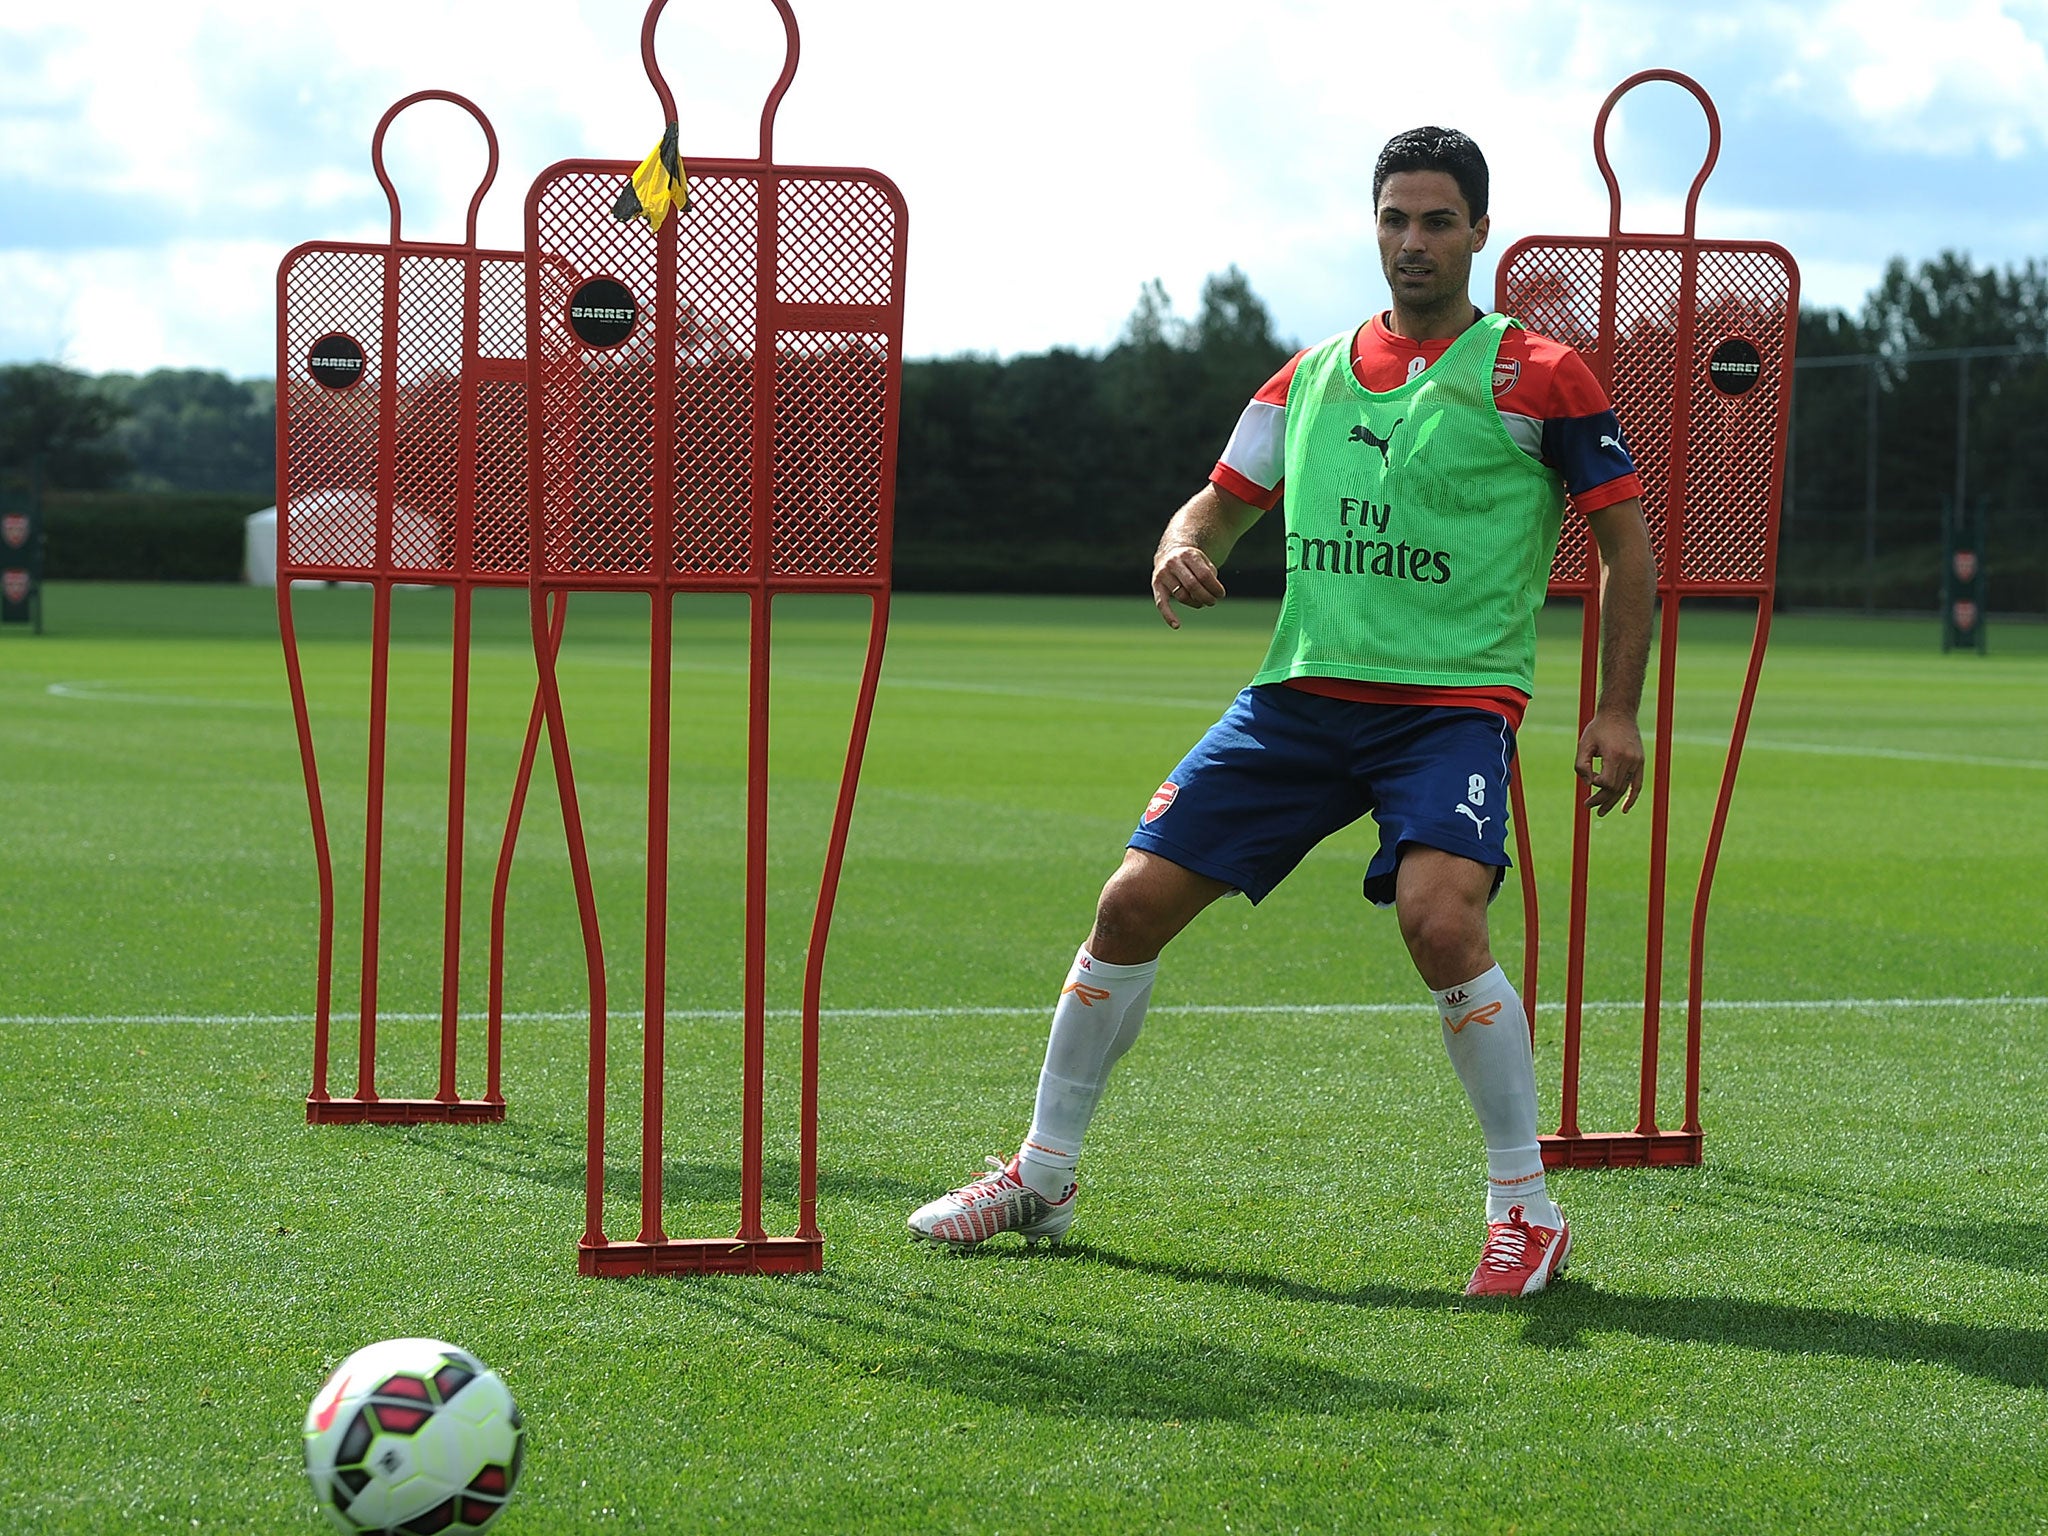 Mikel Arteta is set to be named Arsenal captain